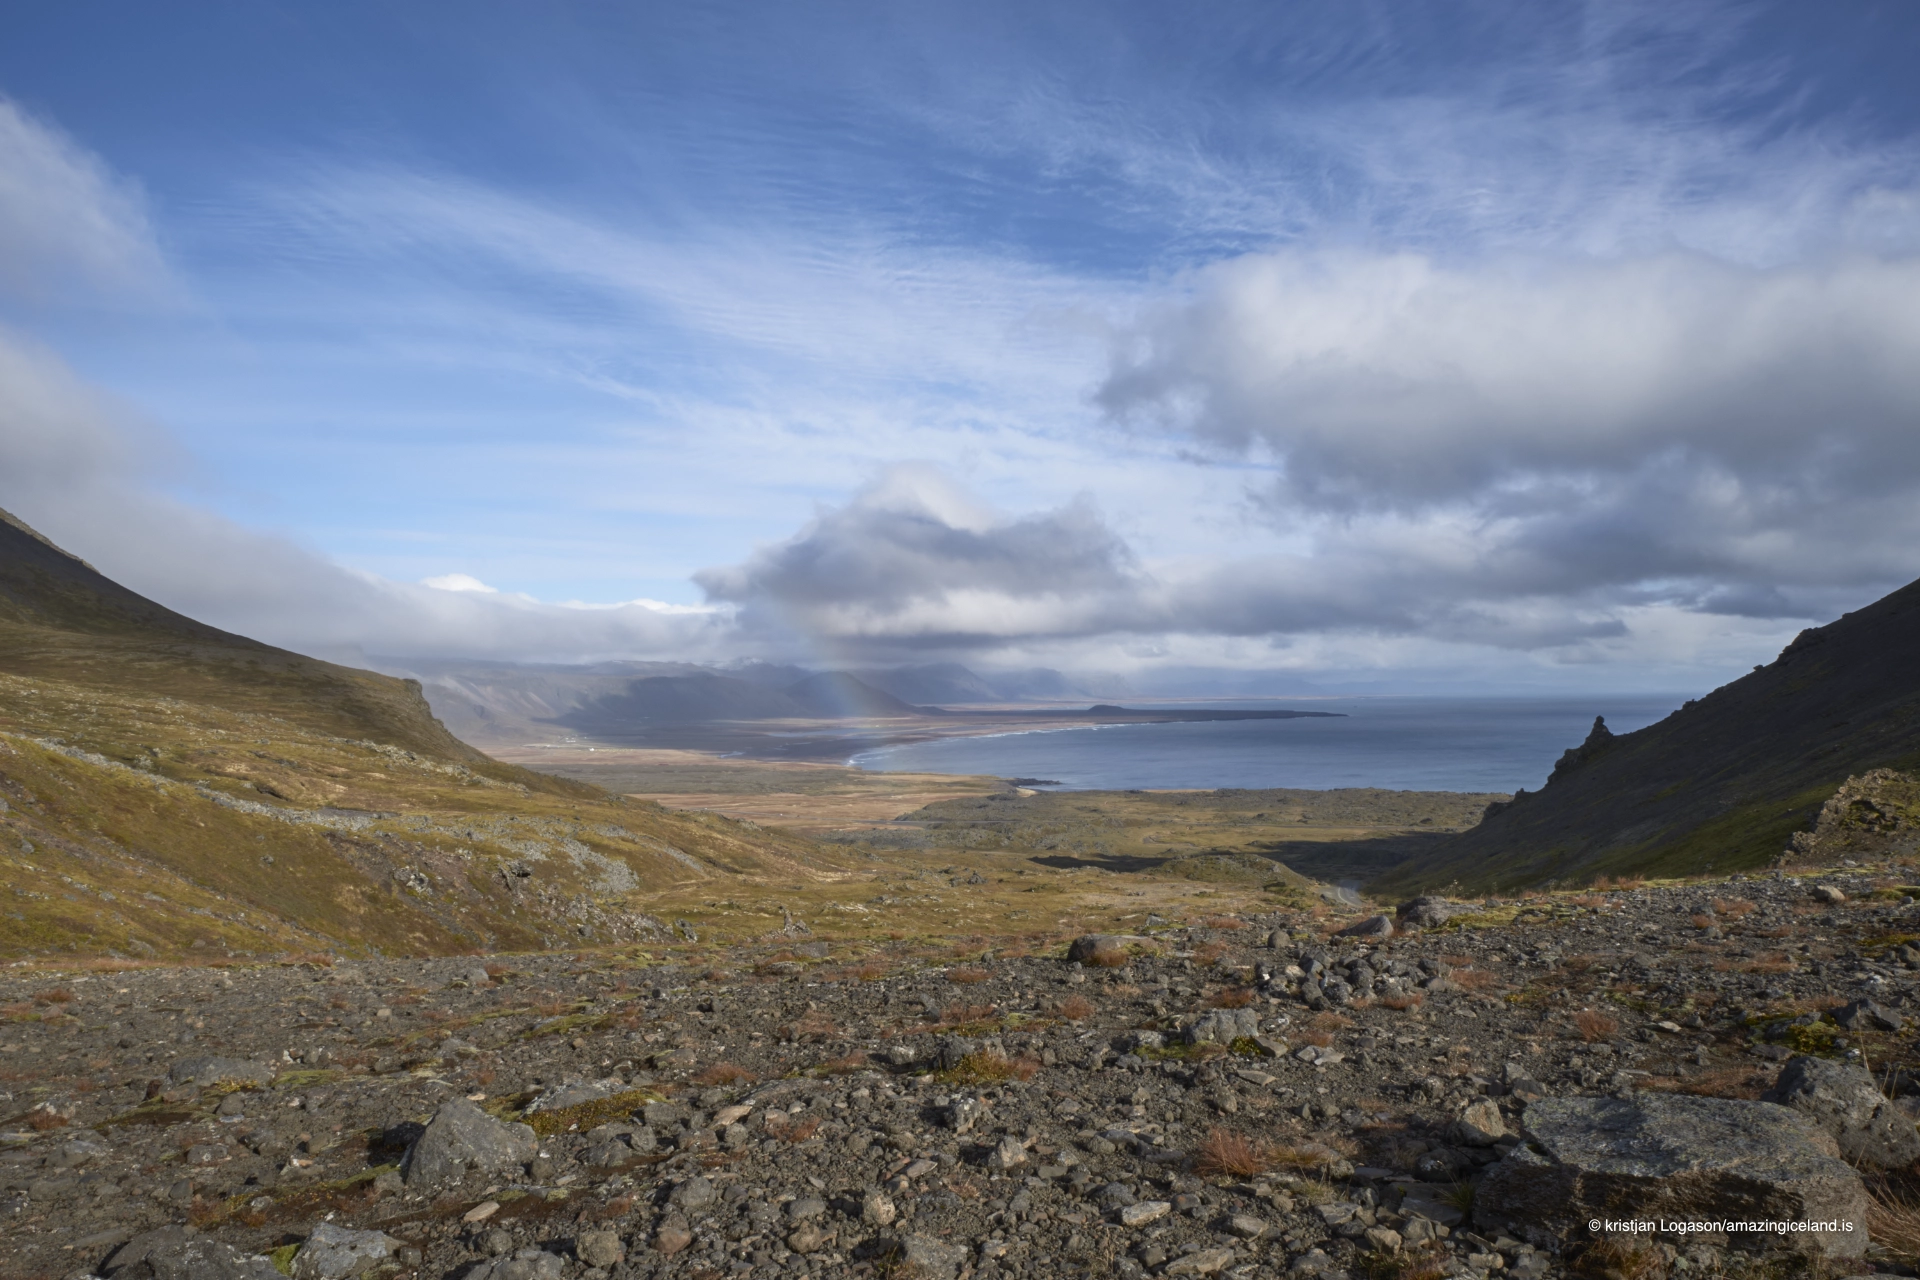 View over Snæfellsnes and surrounding area from the carpark by Sönghellir cave